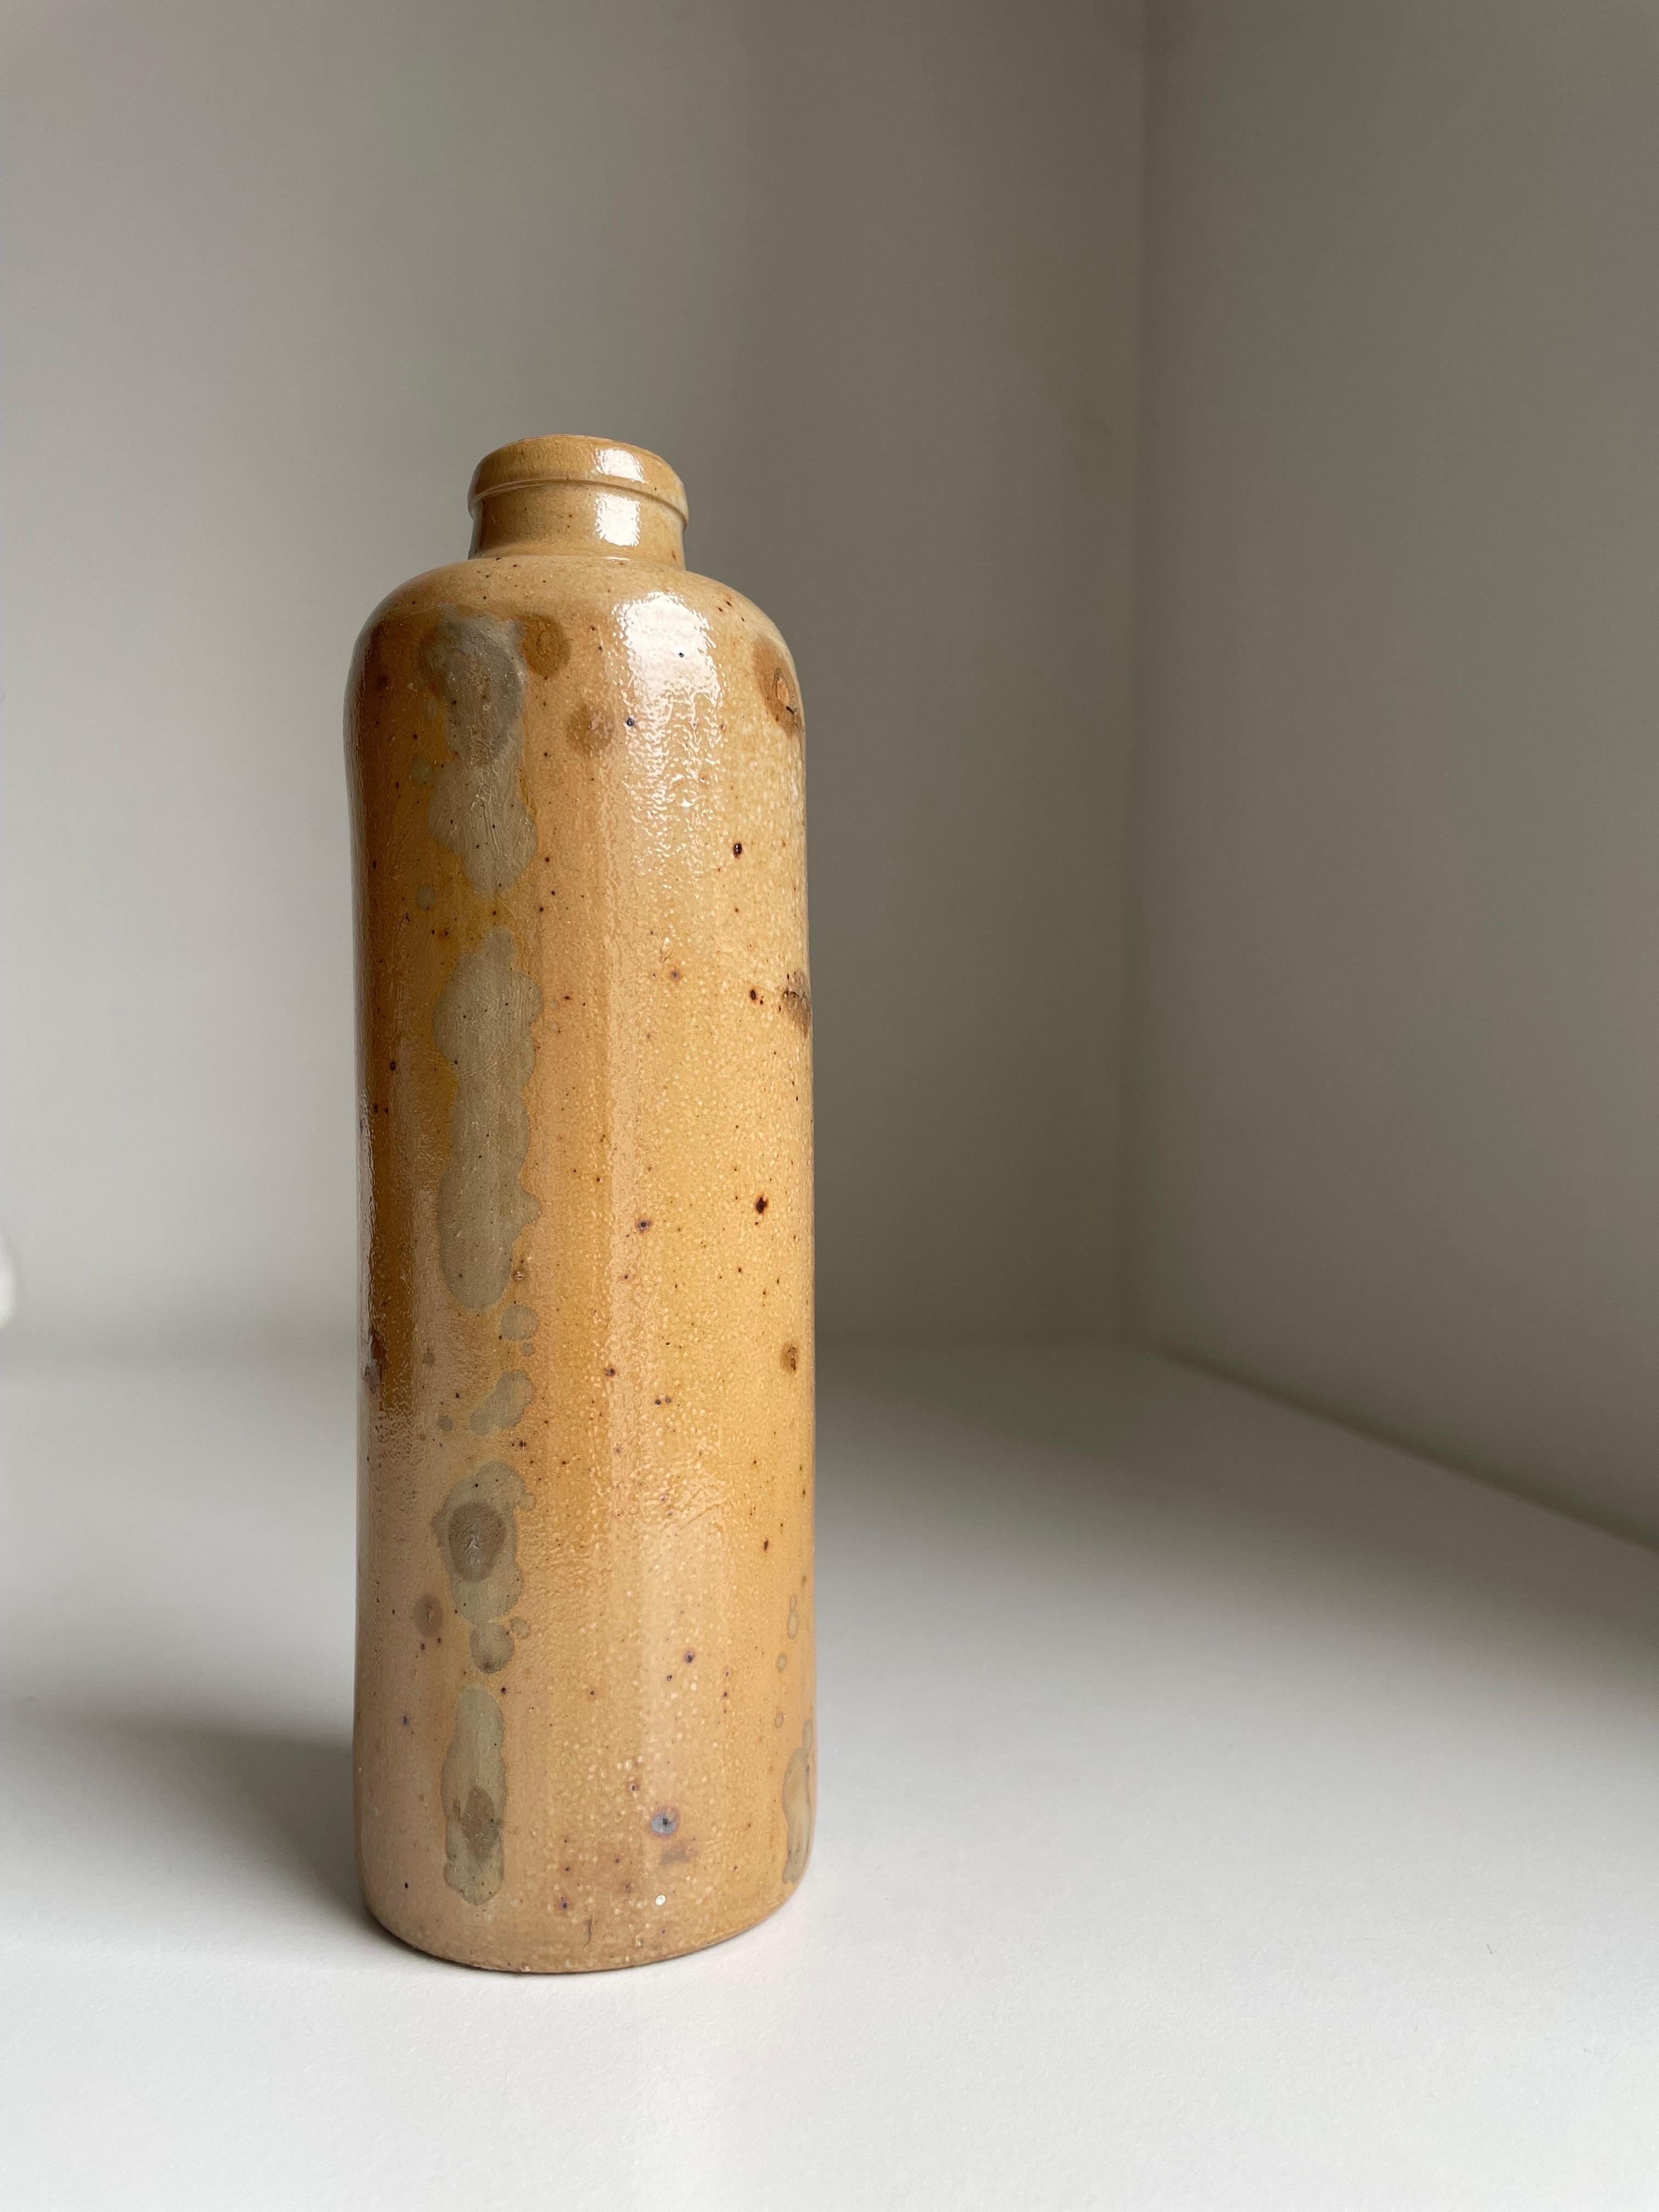 Slim and rustic midcentury ceramic bottle vase with salt glaze in light caramel and brown colors. Beautiful vintage condition. 
Denmark, 1960s.